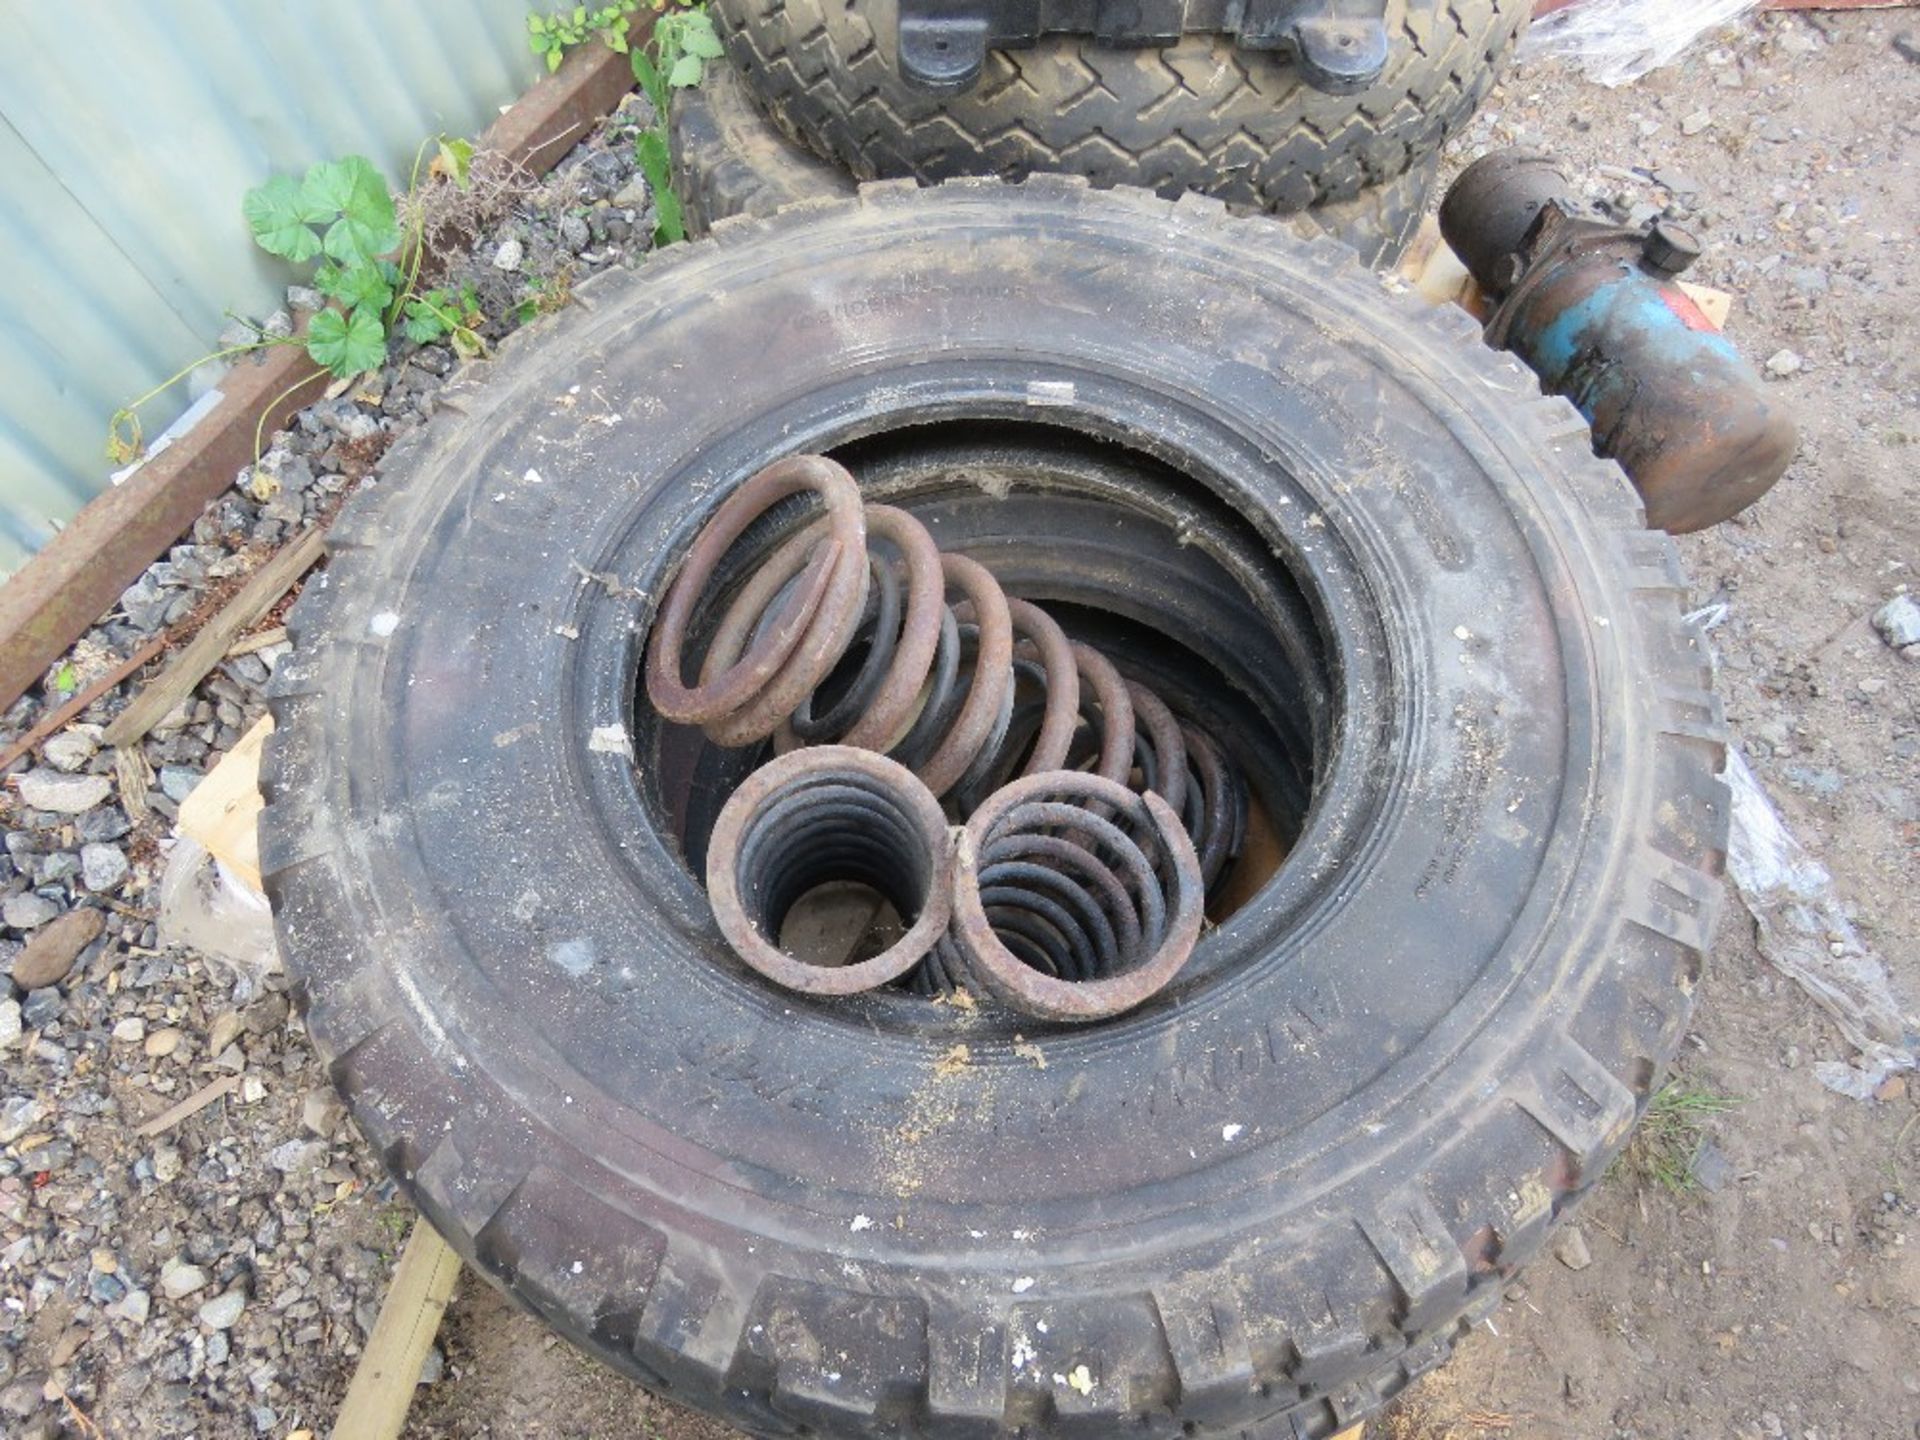 ASSORTED LANDROVER SPARES INCLUDING WHEELS, PLUS A HYDRAULIC PUMP UNIT. THIS LOT IS SOLD UNDER T - Image 5 of 8